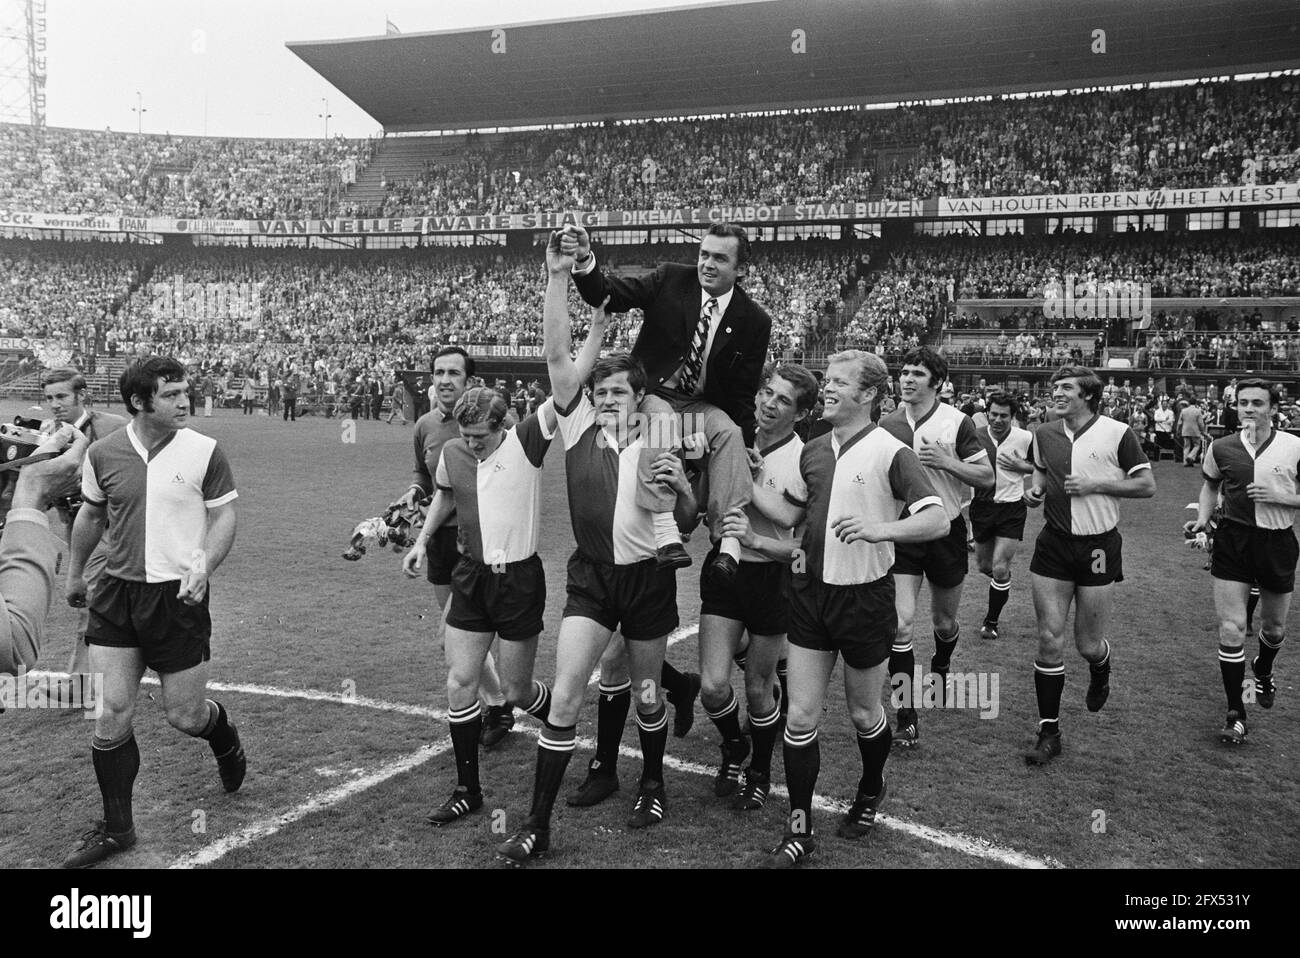 Feijenoord v Holland-Sport 8-2; Ernst Happel is taken on shoulders by players, May 10, 1970, shoulders, sports, trainers, soccer, The Netherlands, 20th century press agency photo, news to remember, documentary, historic photography 1945-1990, visual stories, human history of the Twentieth Century, capturing moments in time Stock Photo